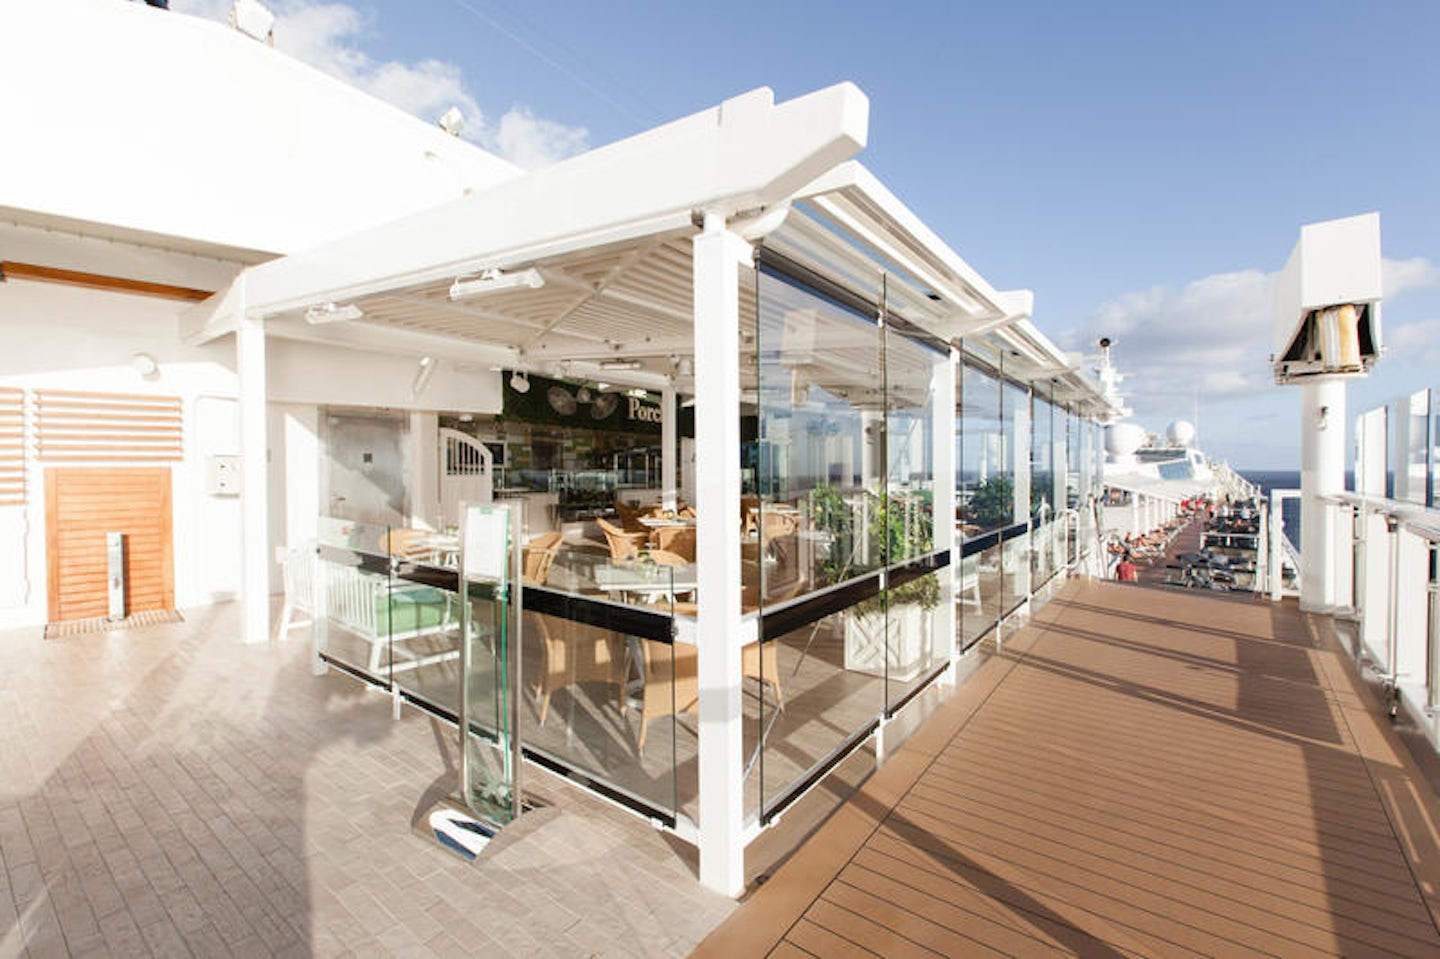 The Porch on Celebrity Silhouette